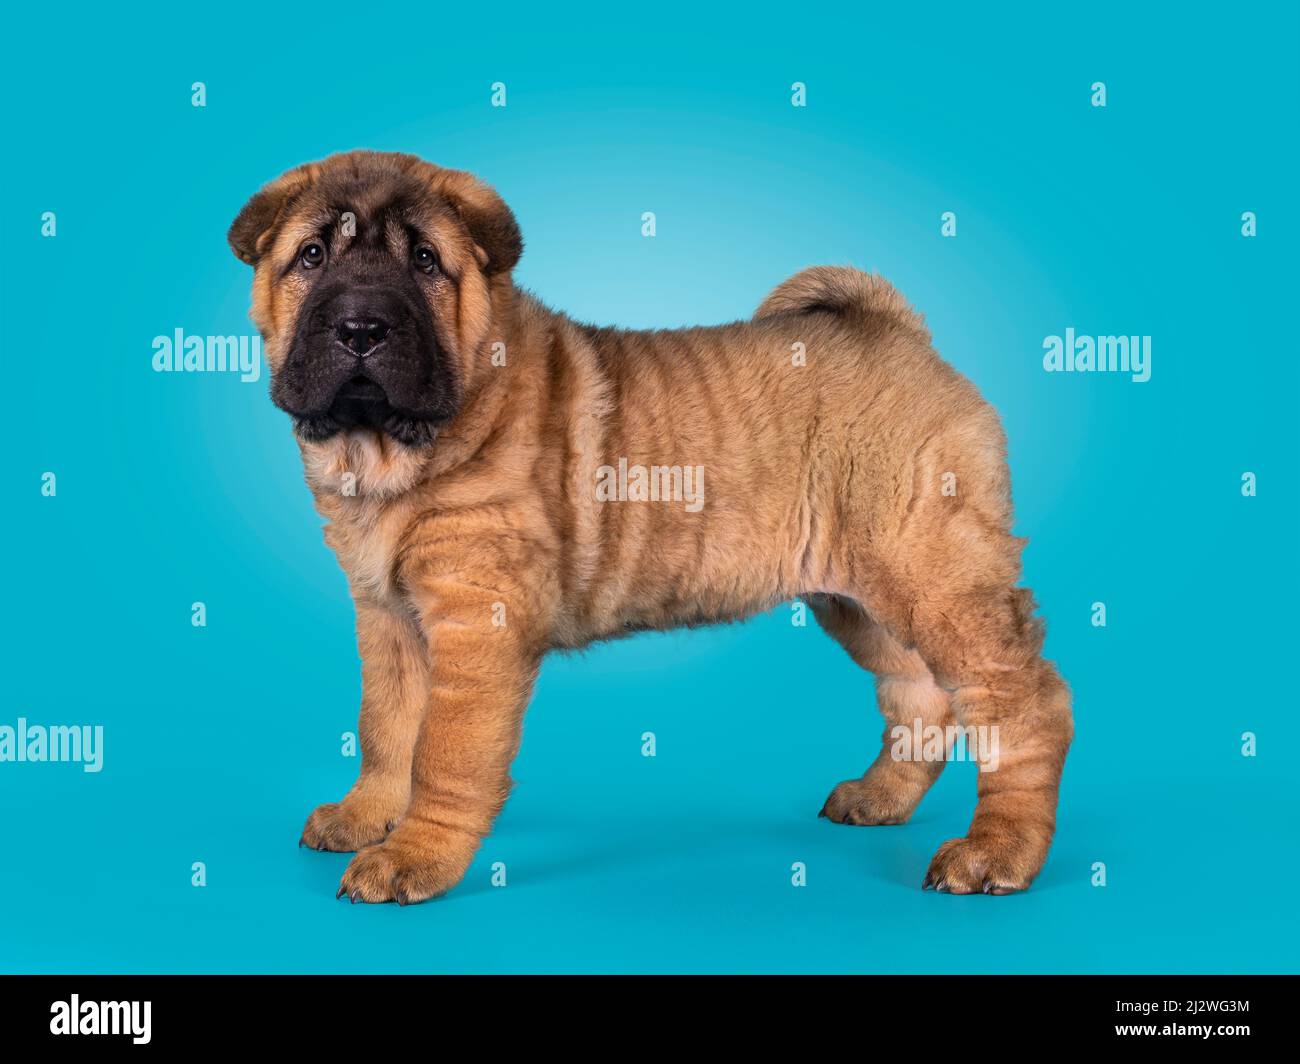 Adorable Shar-pei dog pup, standing side ways. Looking towards camera with cute droopy eyes. Isolated on a turquoise blue background. Stock Photo